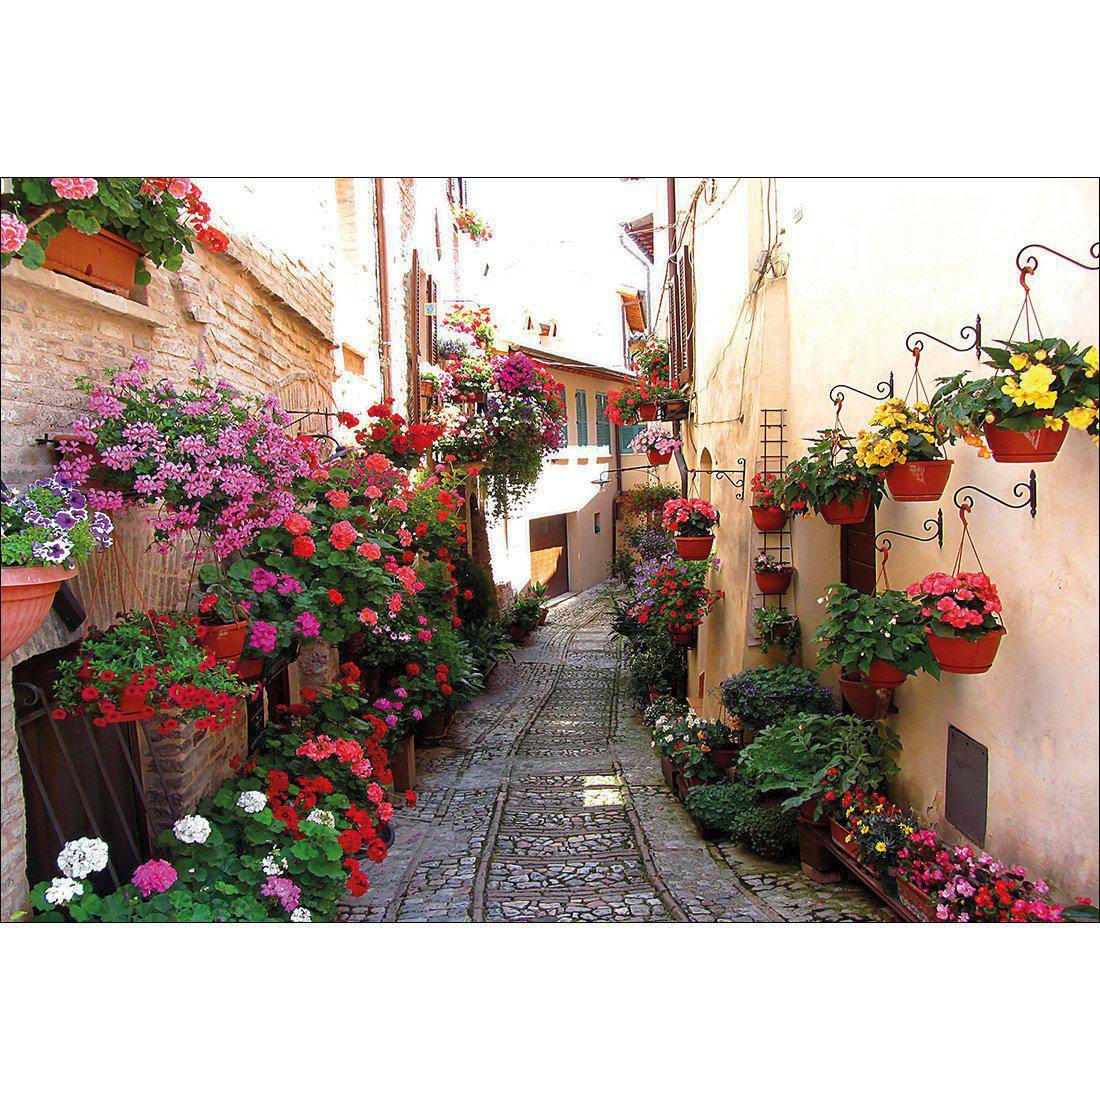 Floral Alley In Italy Canvas Art-Canvas-Wall Art Designs-45x30cm-Canvas - No Frame-Wall Art Designs